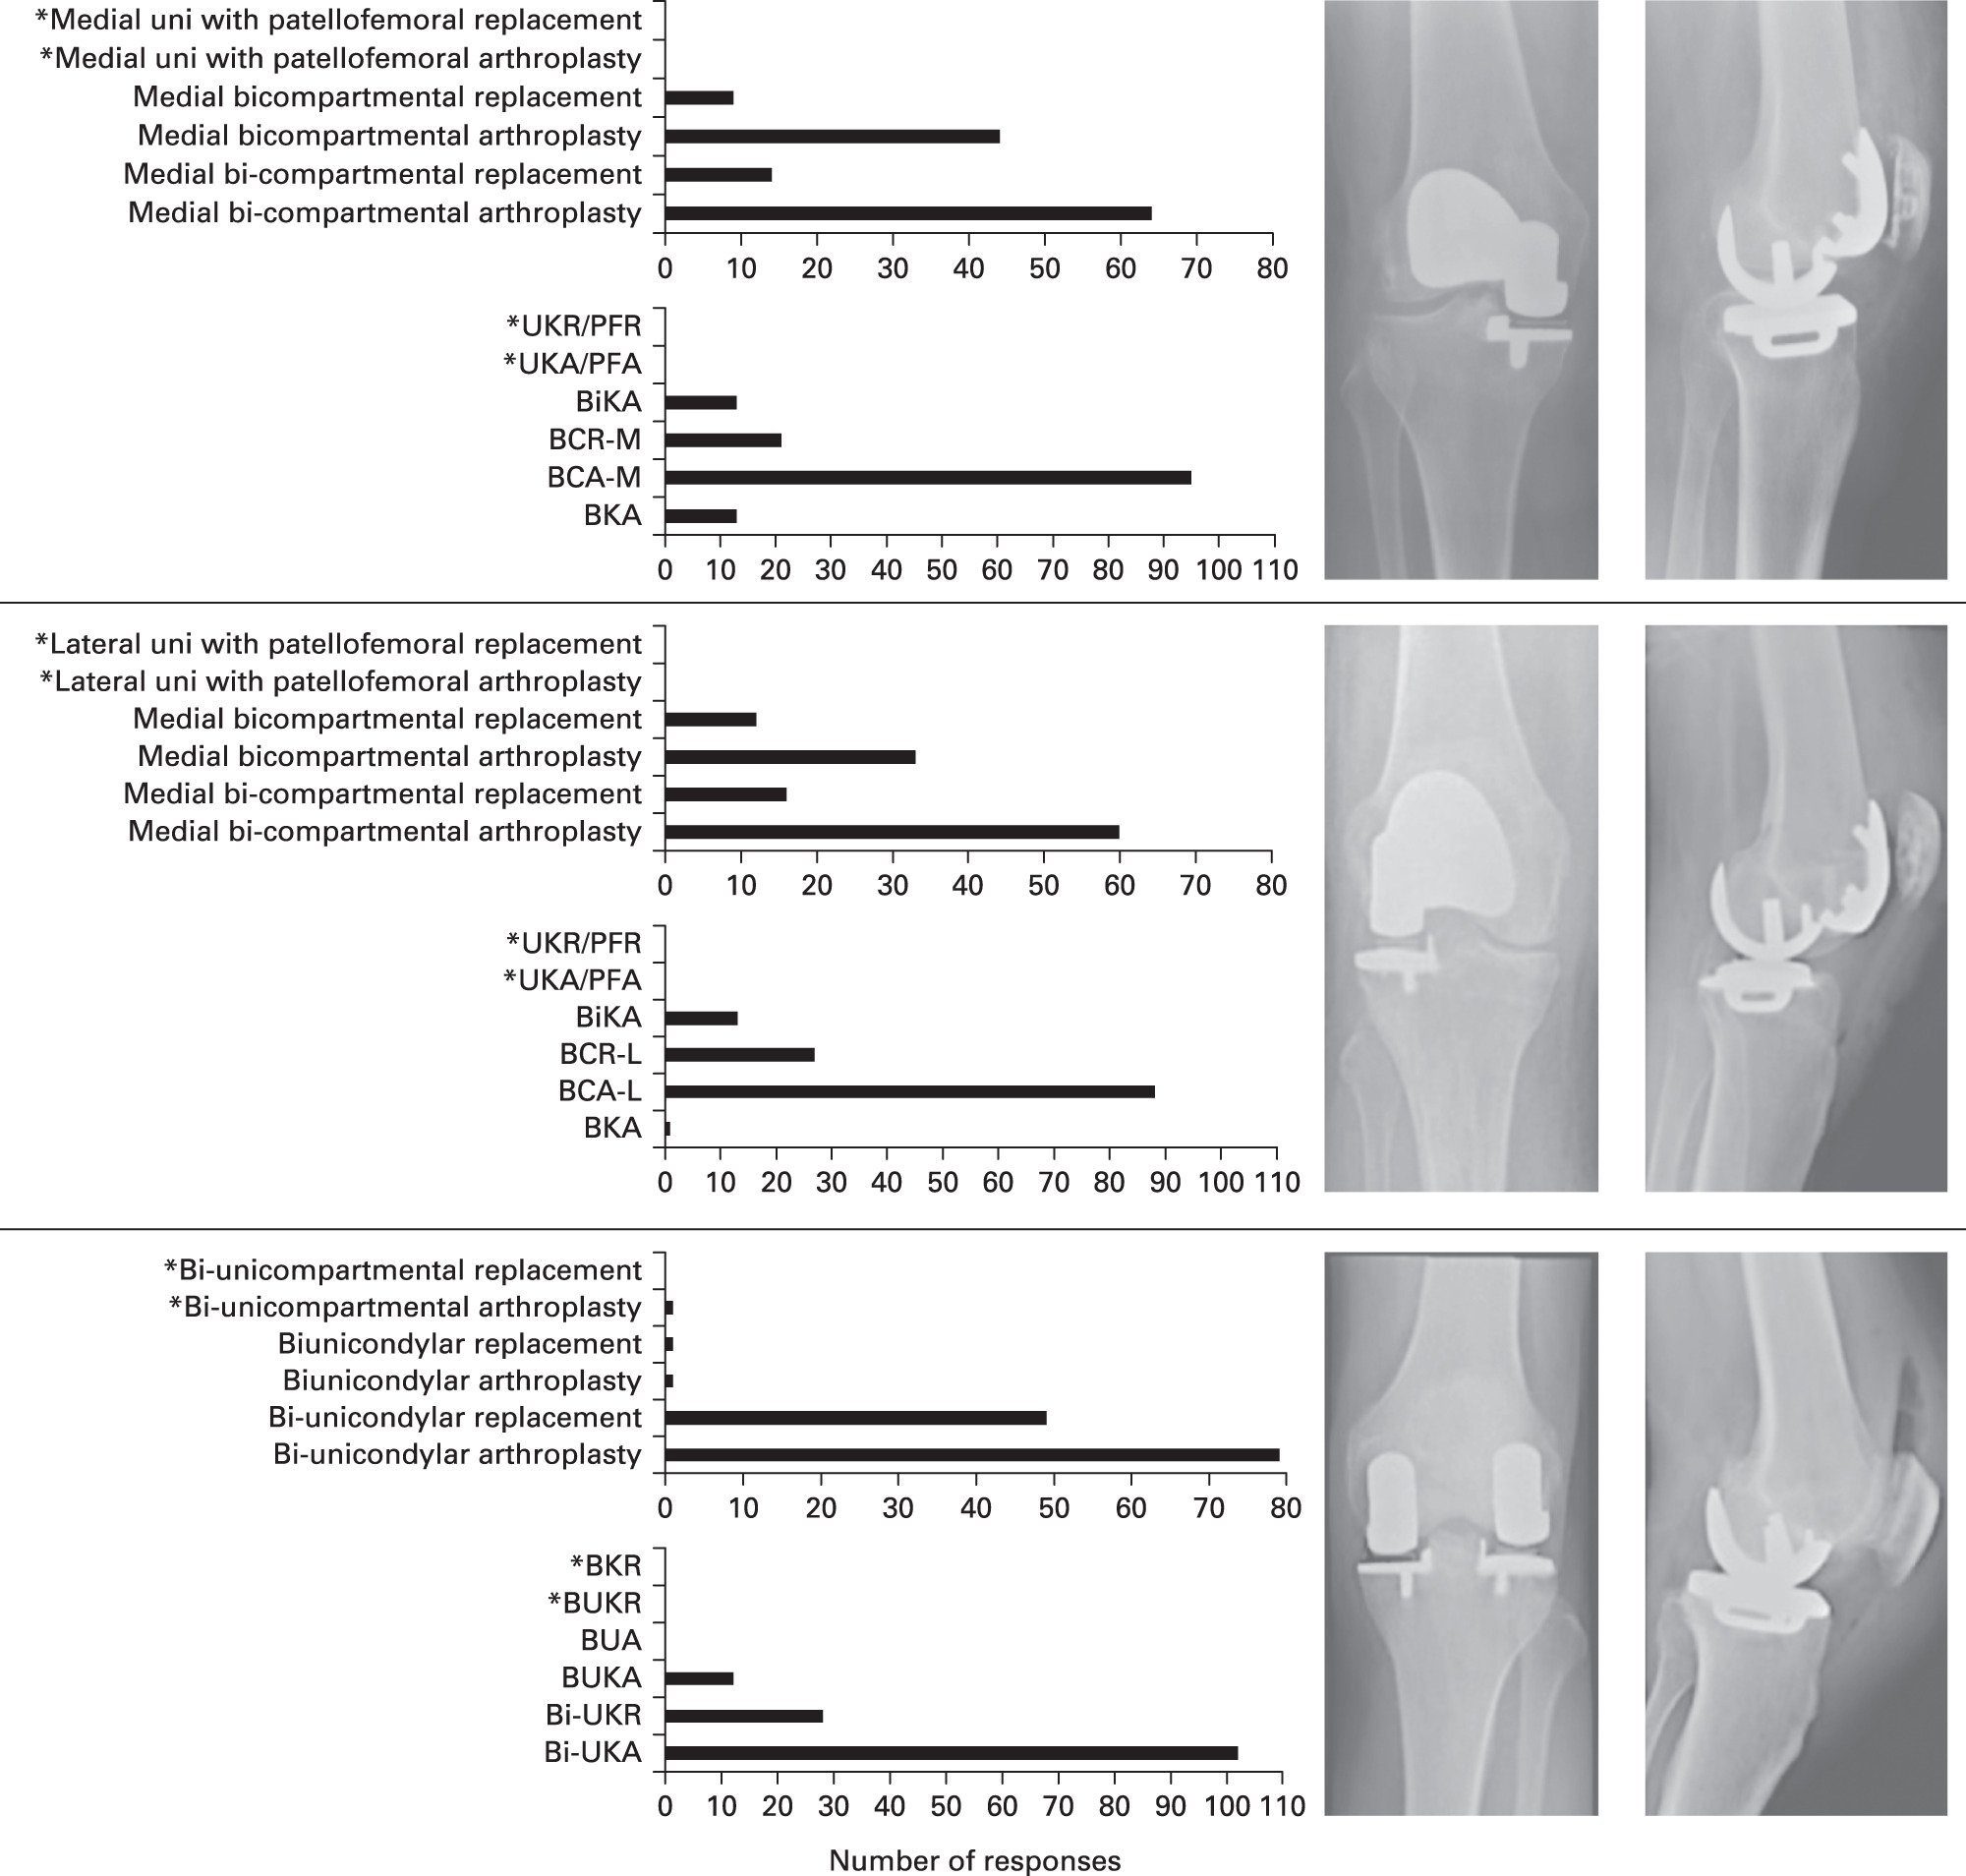 Fig. 1 
          Collective results of the two surveys completed by orthopaedic speciality registrars (survey 1) and orthopaedic surgeons, speciality registrars, and arthroplasty biomechanical engineers (survey 2) regarding terminology and abbreviations for combined partial knee arthroplasty procedures. *Excluded from second survey.
        